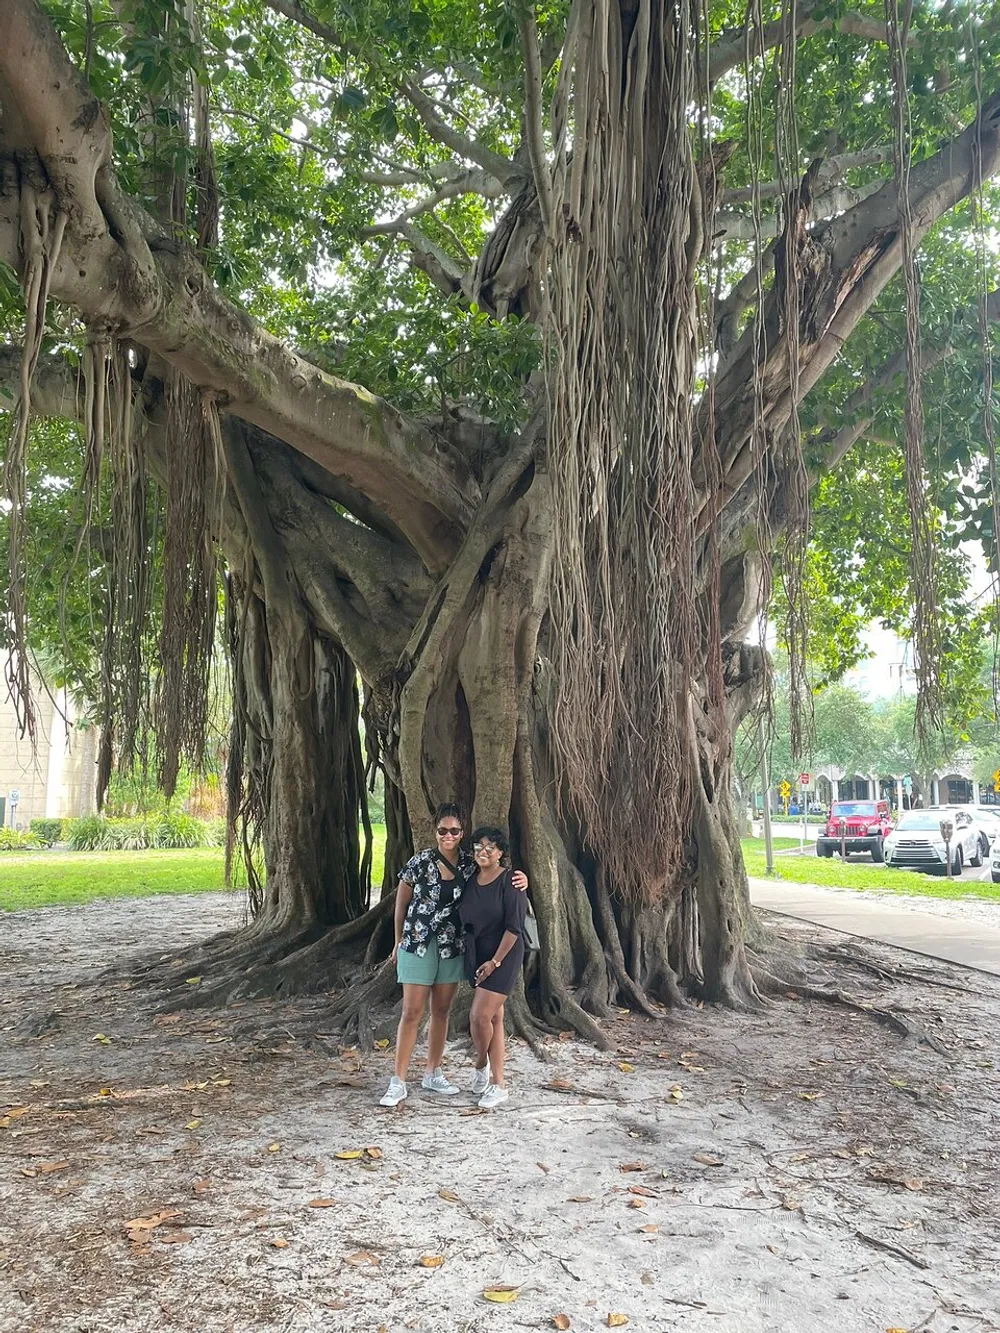 Two individuals are standing in front of an ancient and extensively rooted banyan tree